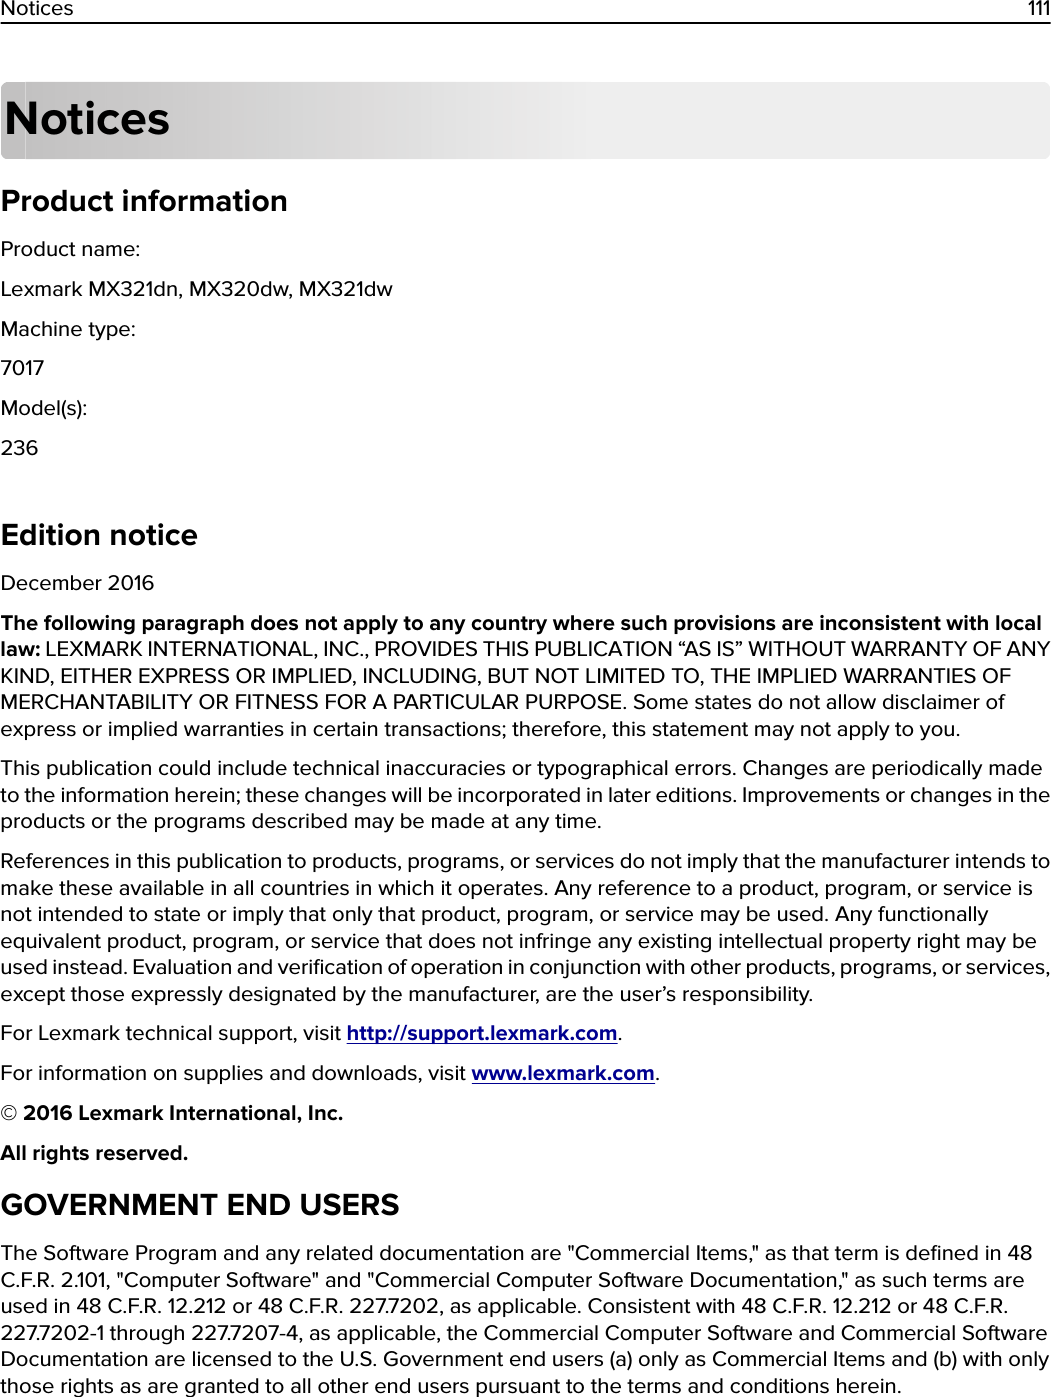 NoticesProduct informationProduct name:Lexmark MX321dn, MX320dw, MX321dwMachine type:7017Model(s):236Edition noticeDecember 2016The following paragraph does not apply to any country where such provisions are inconsistent with locallaw: LEXMARK INTERNATIONAL, INC., PROVIDES THIS PUBLICATION “AS IS” WITHOUT WARRANTY OF ANYKIND, EITHER EXPRESS OR IMPLIED, INCLUDING, BUT NOT LIMITED TO, THE IMPLIED WARRANTIES OFMERCHANTABILITY OR FITNESS FOR A PARTICULAR PURPOSE. Some states do not allow disclaimer ofexpress or implied warranties in certain transactions; therefore, this statement may not apply to you.This publication could include technical inaccuracies or typographical errors. Changes are periodically madeto the information herein; these changes will be incorporated in later editions. Improvements or changes in theproducts or the programs described may be made at any time.References in this publication to products, programs, or services do not imply that the manufacturer intends tomake these available in all countries in which it operates. Any reference to a product, program, or service isnot intended to state or imply that only that product, program, or service may be used. Any functionallyequivalent product, program, or service that does not infringe any existing intellectual property right may beused instead. Evaluation and veriﬁcation of operation in conjunction with other products, programs, or services,except those expressly designated by the manufacturer, are the user’s responsibility.For Lexmark technical support, visit http://support.lexmark.com.For information on supplies and downloads, visit www.lexmark.com.© 2016 Lexmark International, Inc.All rights reserved.GOVERNMENT END USERSThe Software Program and any related documentation are &quot;Commercial Items,&quot; as that term is deﬁned in 48C.F.R. 2.101, &quot;Computer Software&quot; and &quot;Commercial Computer Software Documentation,&quot; as such terms areused in 48 C.F.R. 12.212 or 48 C.F.R. 227.7202, as applicable. Consistent with 48 C.F.R. 12.212 or 48 C.F.R.227.7202-1 through 227.7207-4, as applicable, the Commercial Computer Software and Commercial SoftwareDocumentation are licensed to the U.S. Government end users (a) only as Commercial Items and (b) with onlythose rights as are granted to all other end users pursuant to the terms and conditions herein.Notices 111